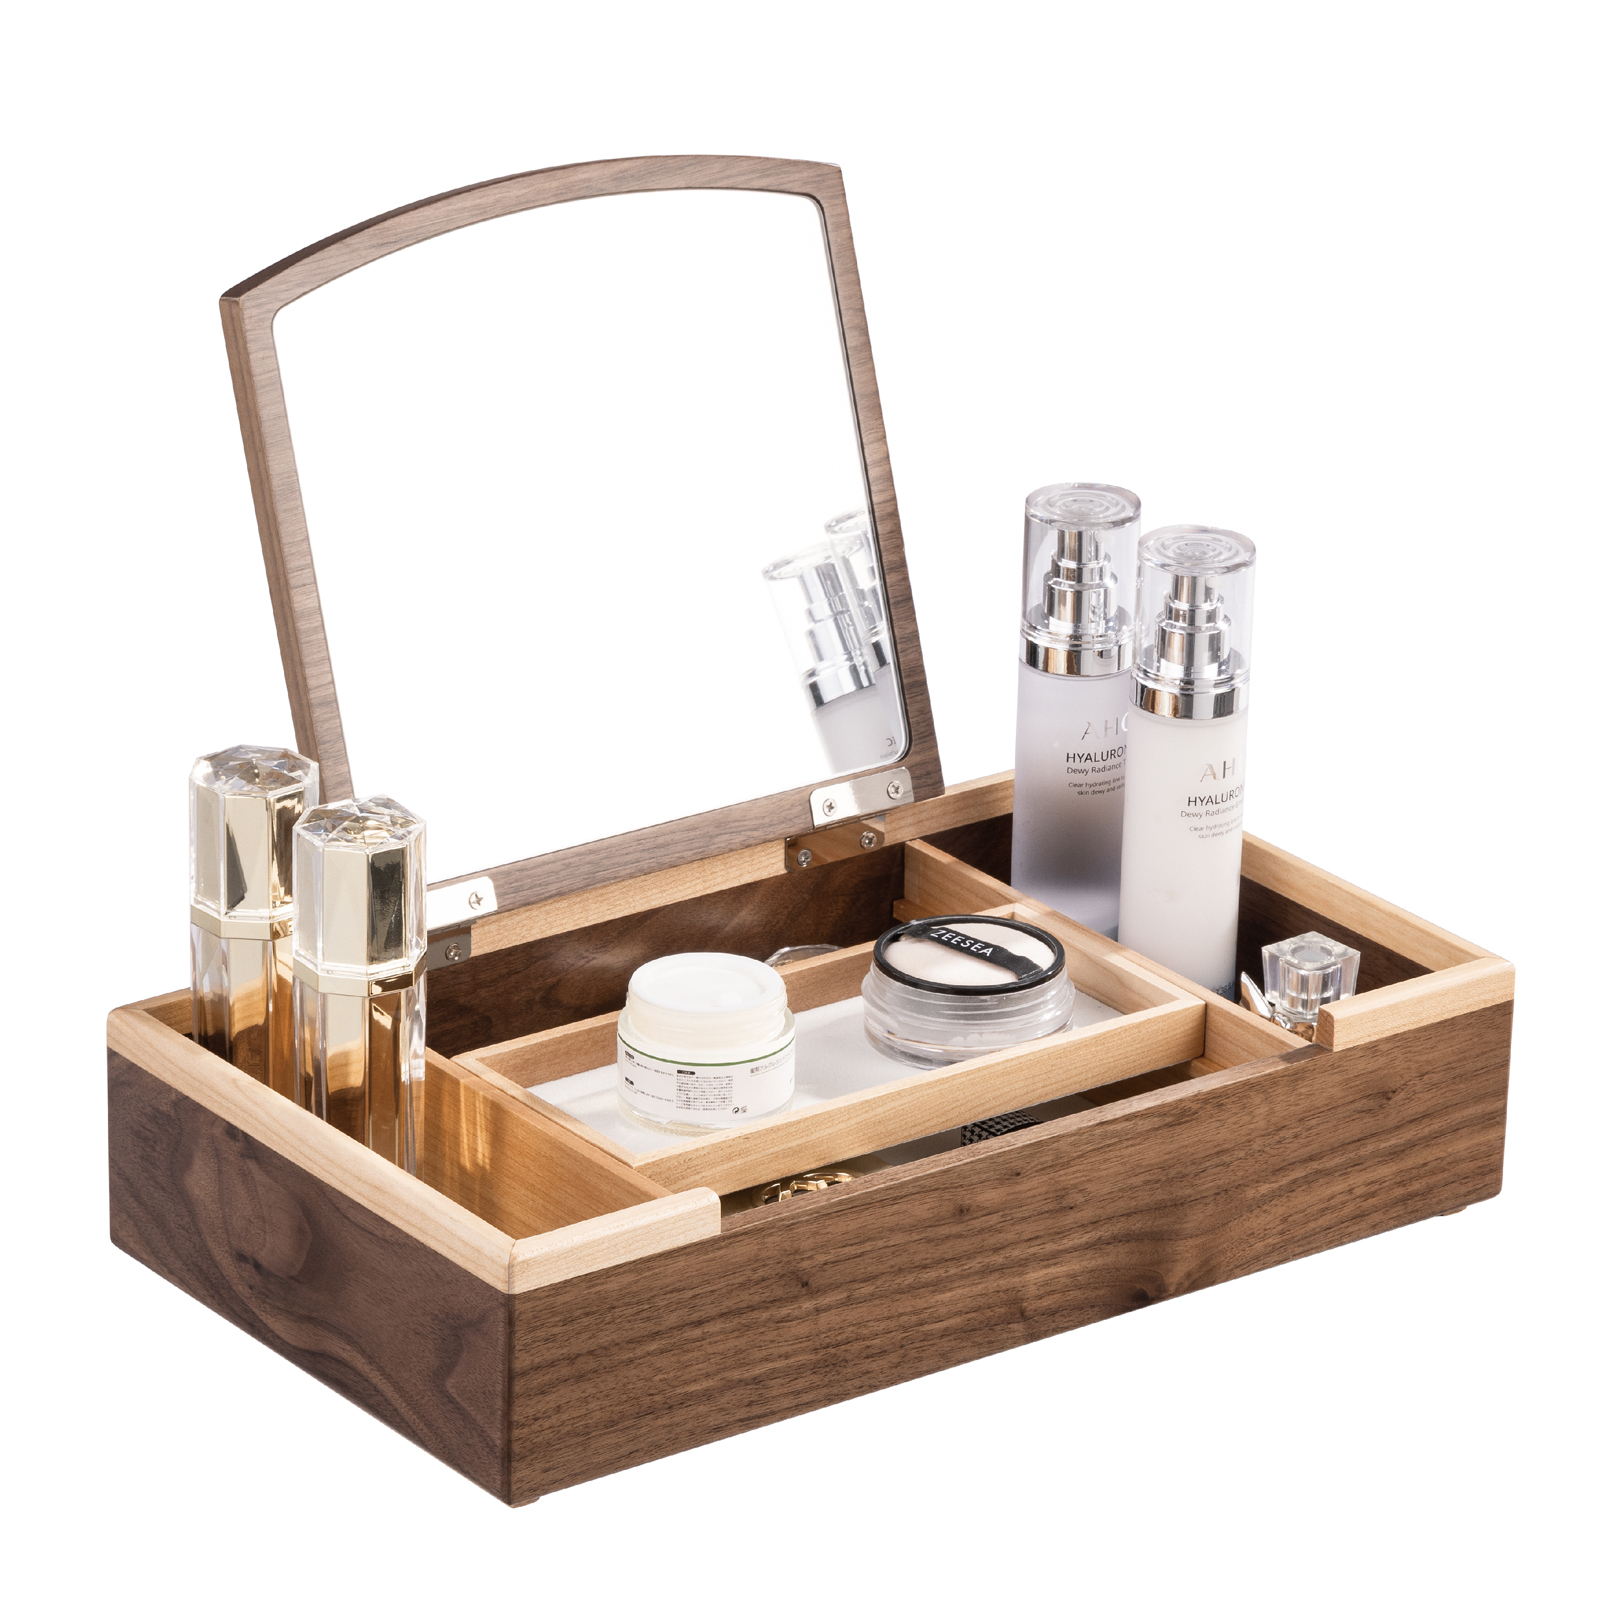 Introducing the Wooden Dressing Box: A Perfect Marriage of Style and Function